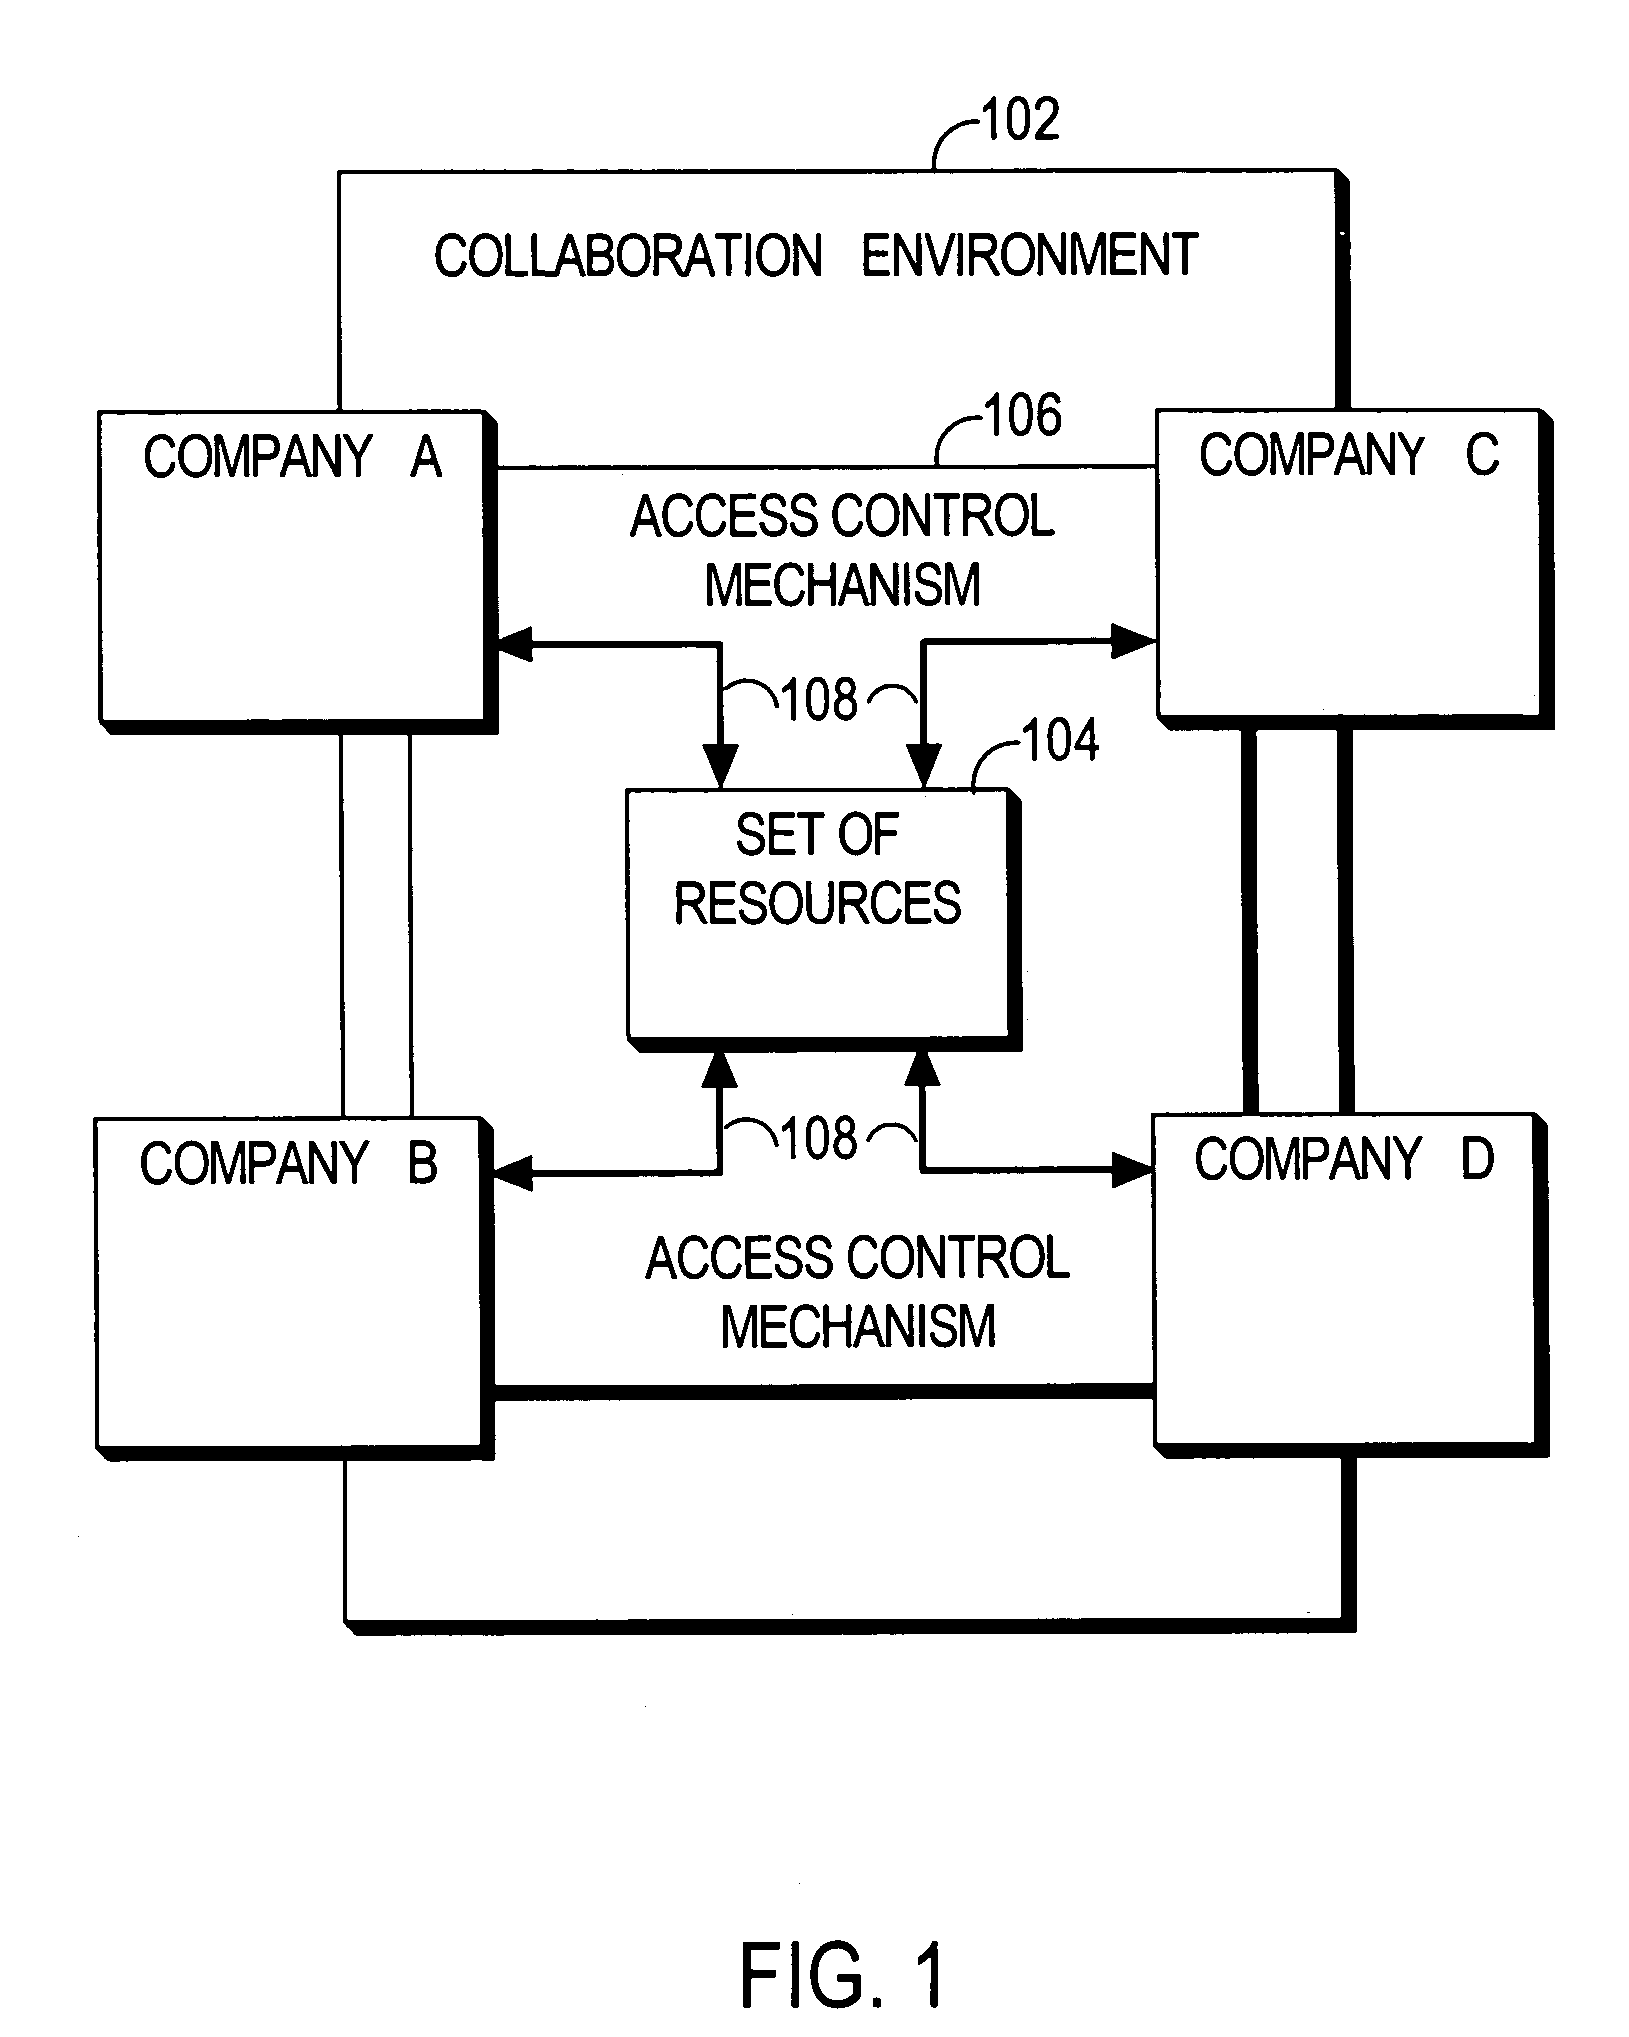 Isolated working chamber associated with a secure inter-company collaboration environment